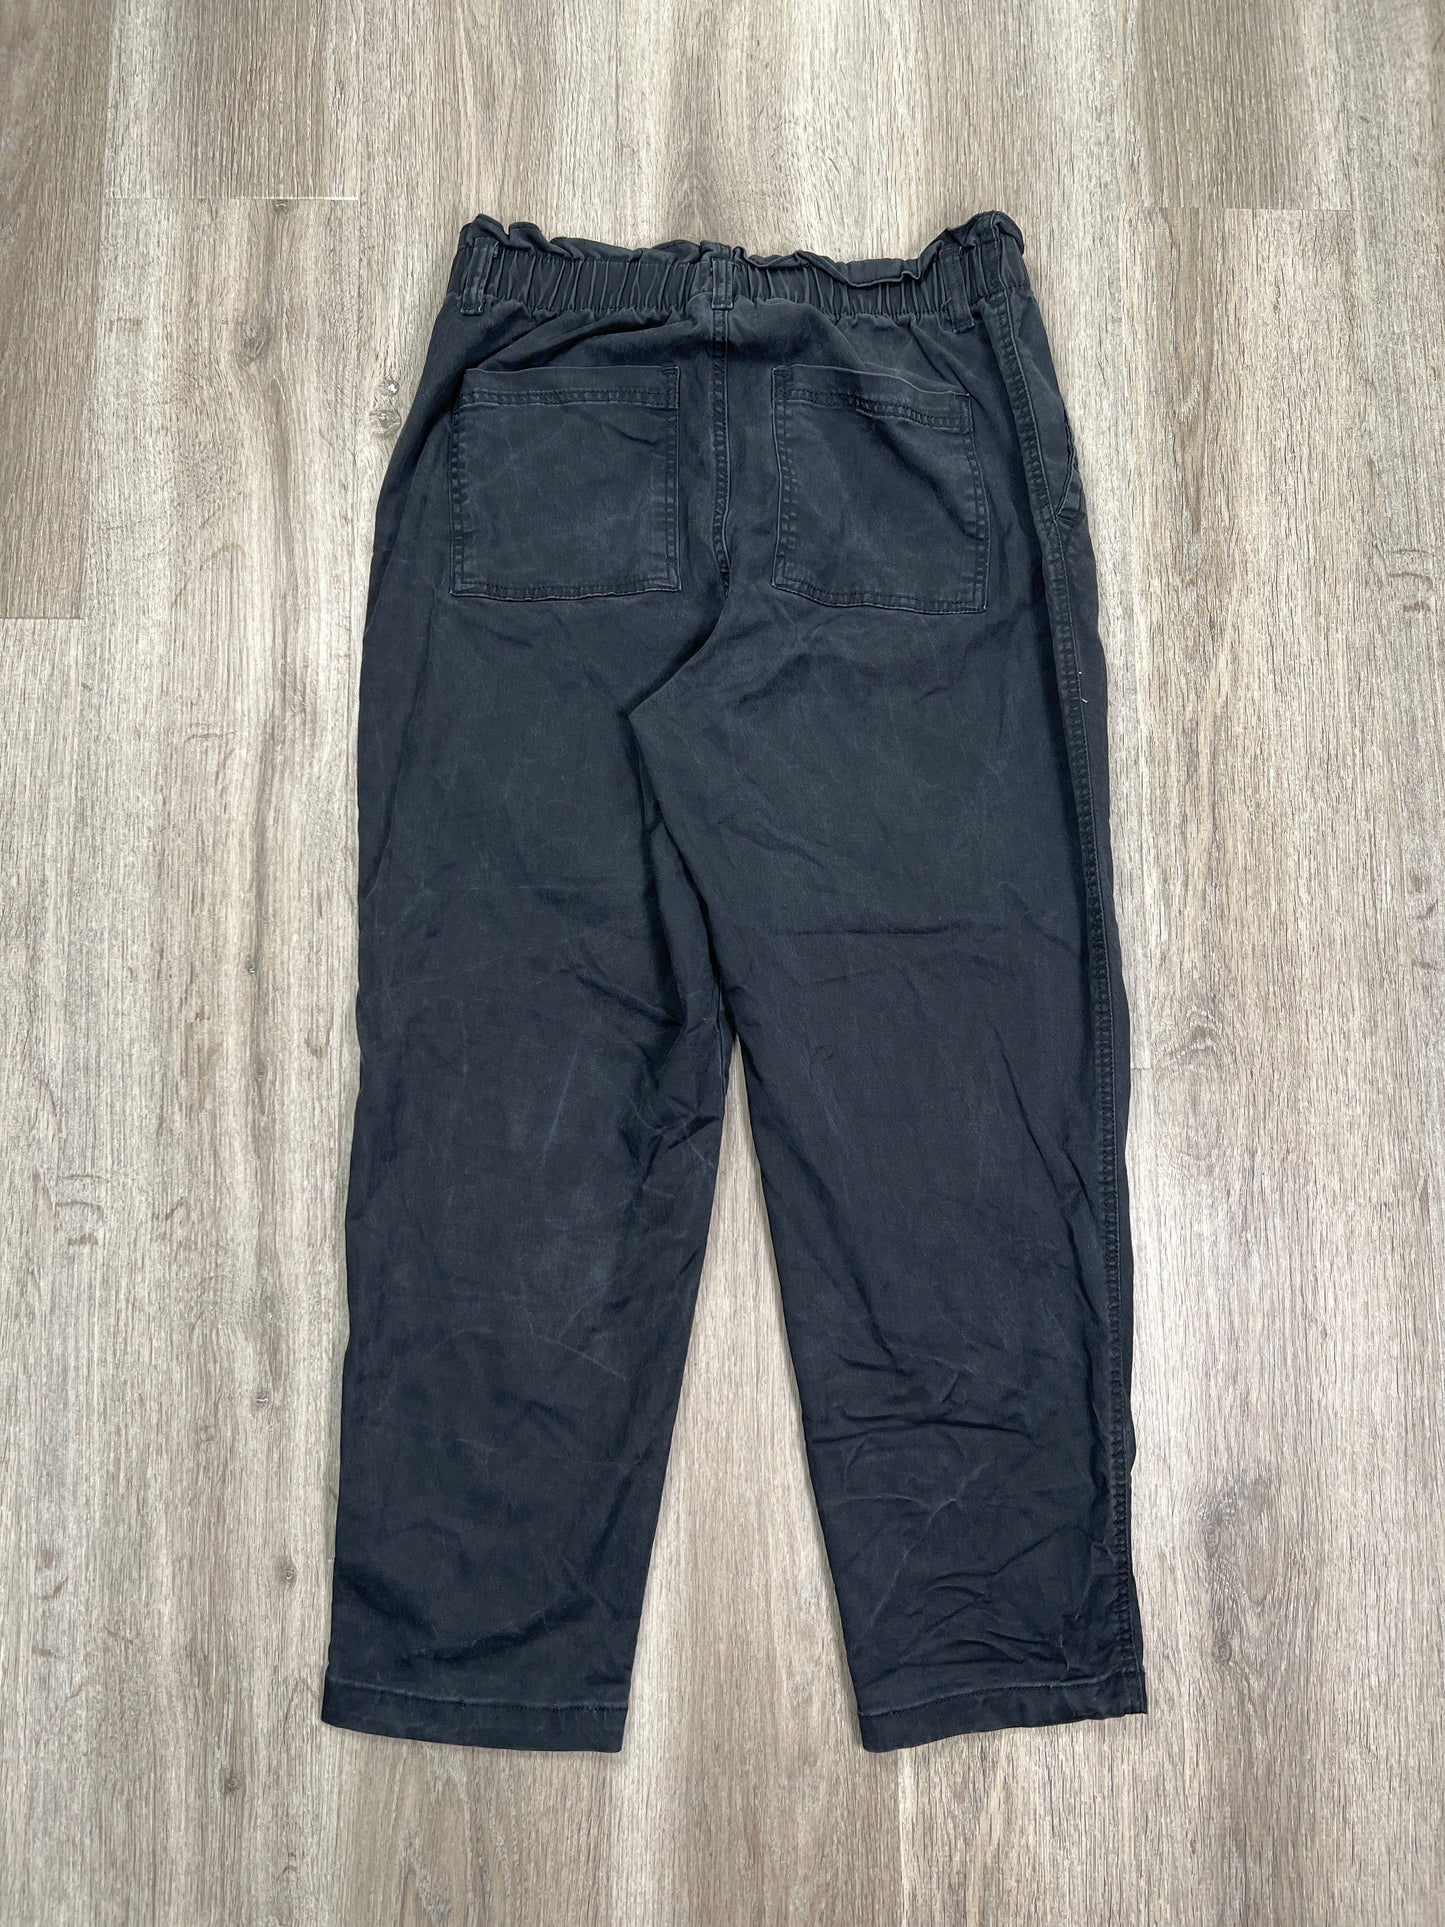 Pants Cargo & Utility By Universal Thread  Size: L